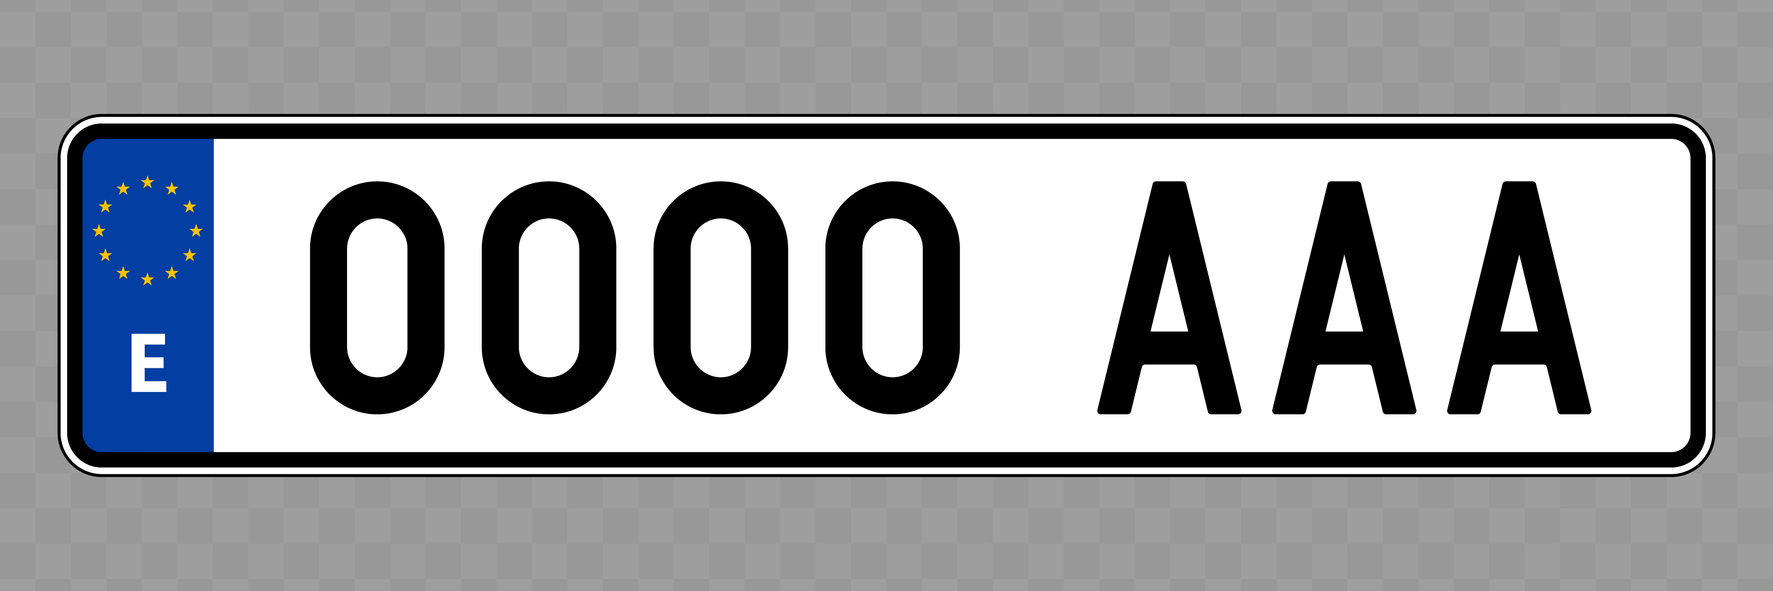 The format of the Spanish licence plate